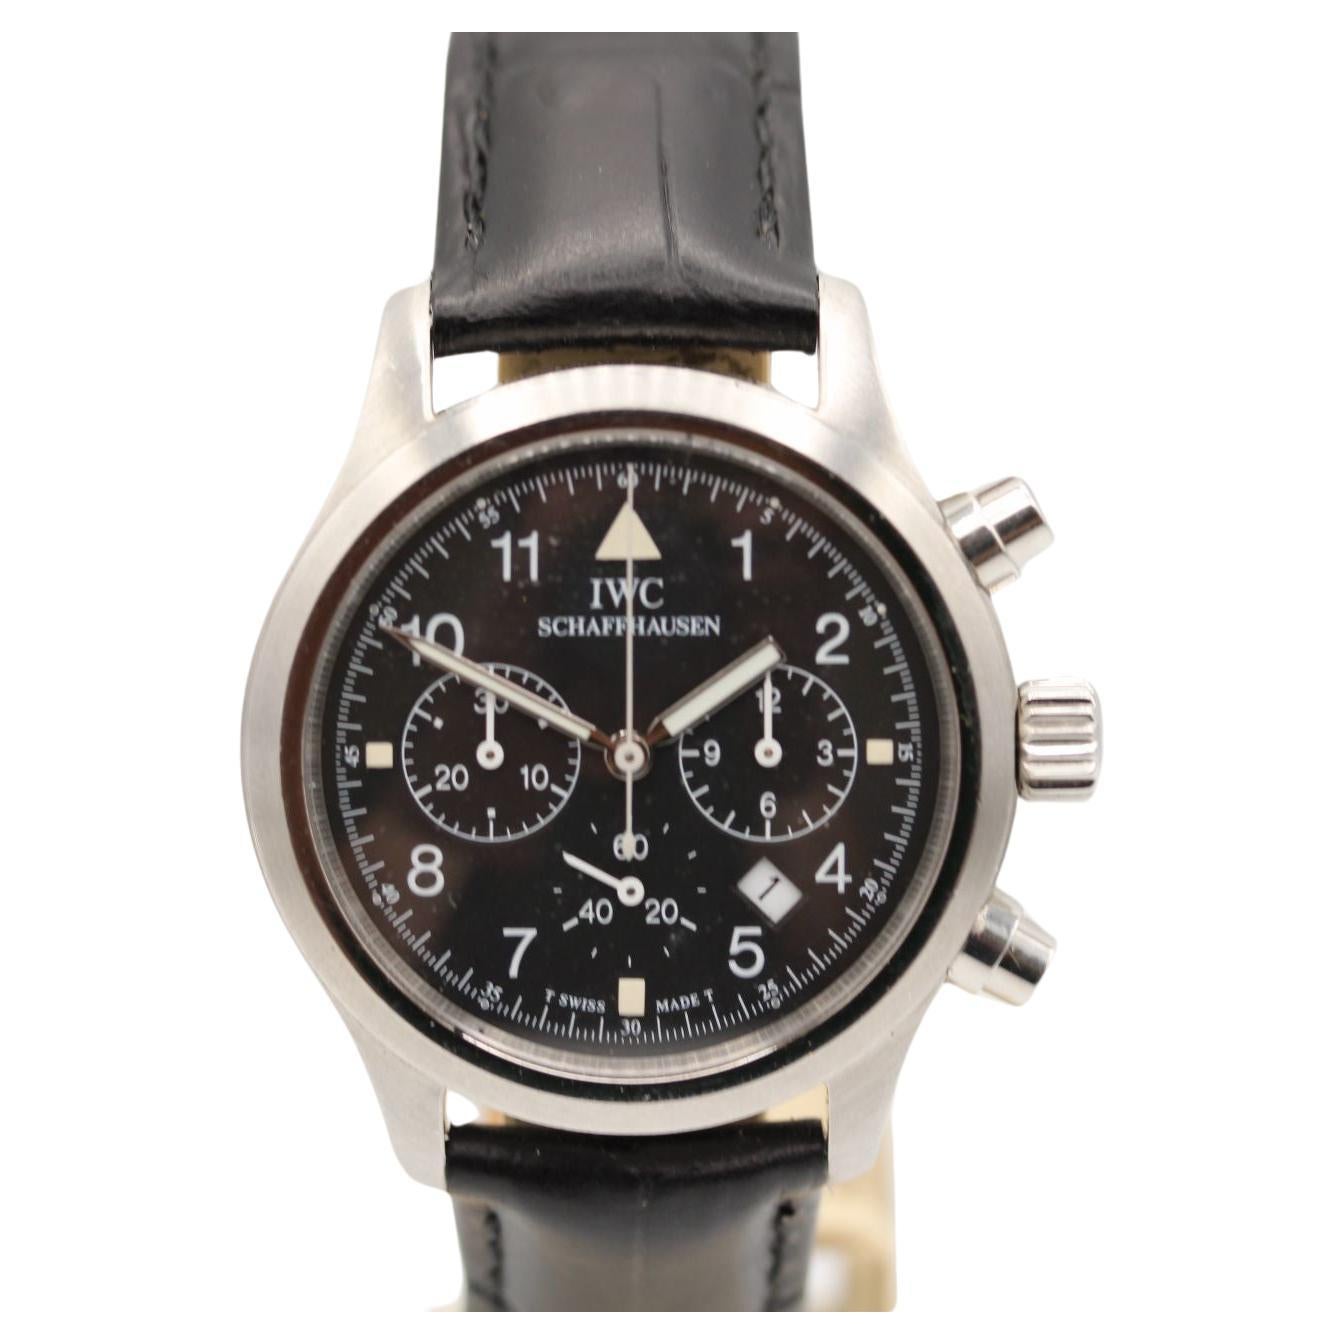  IWC Pilot Chronograph IW3741 Box and Papers 1997 